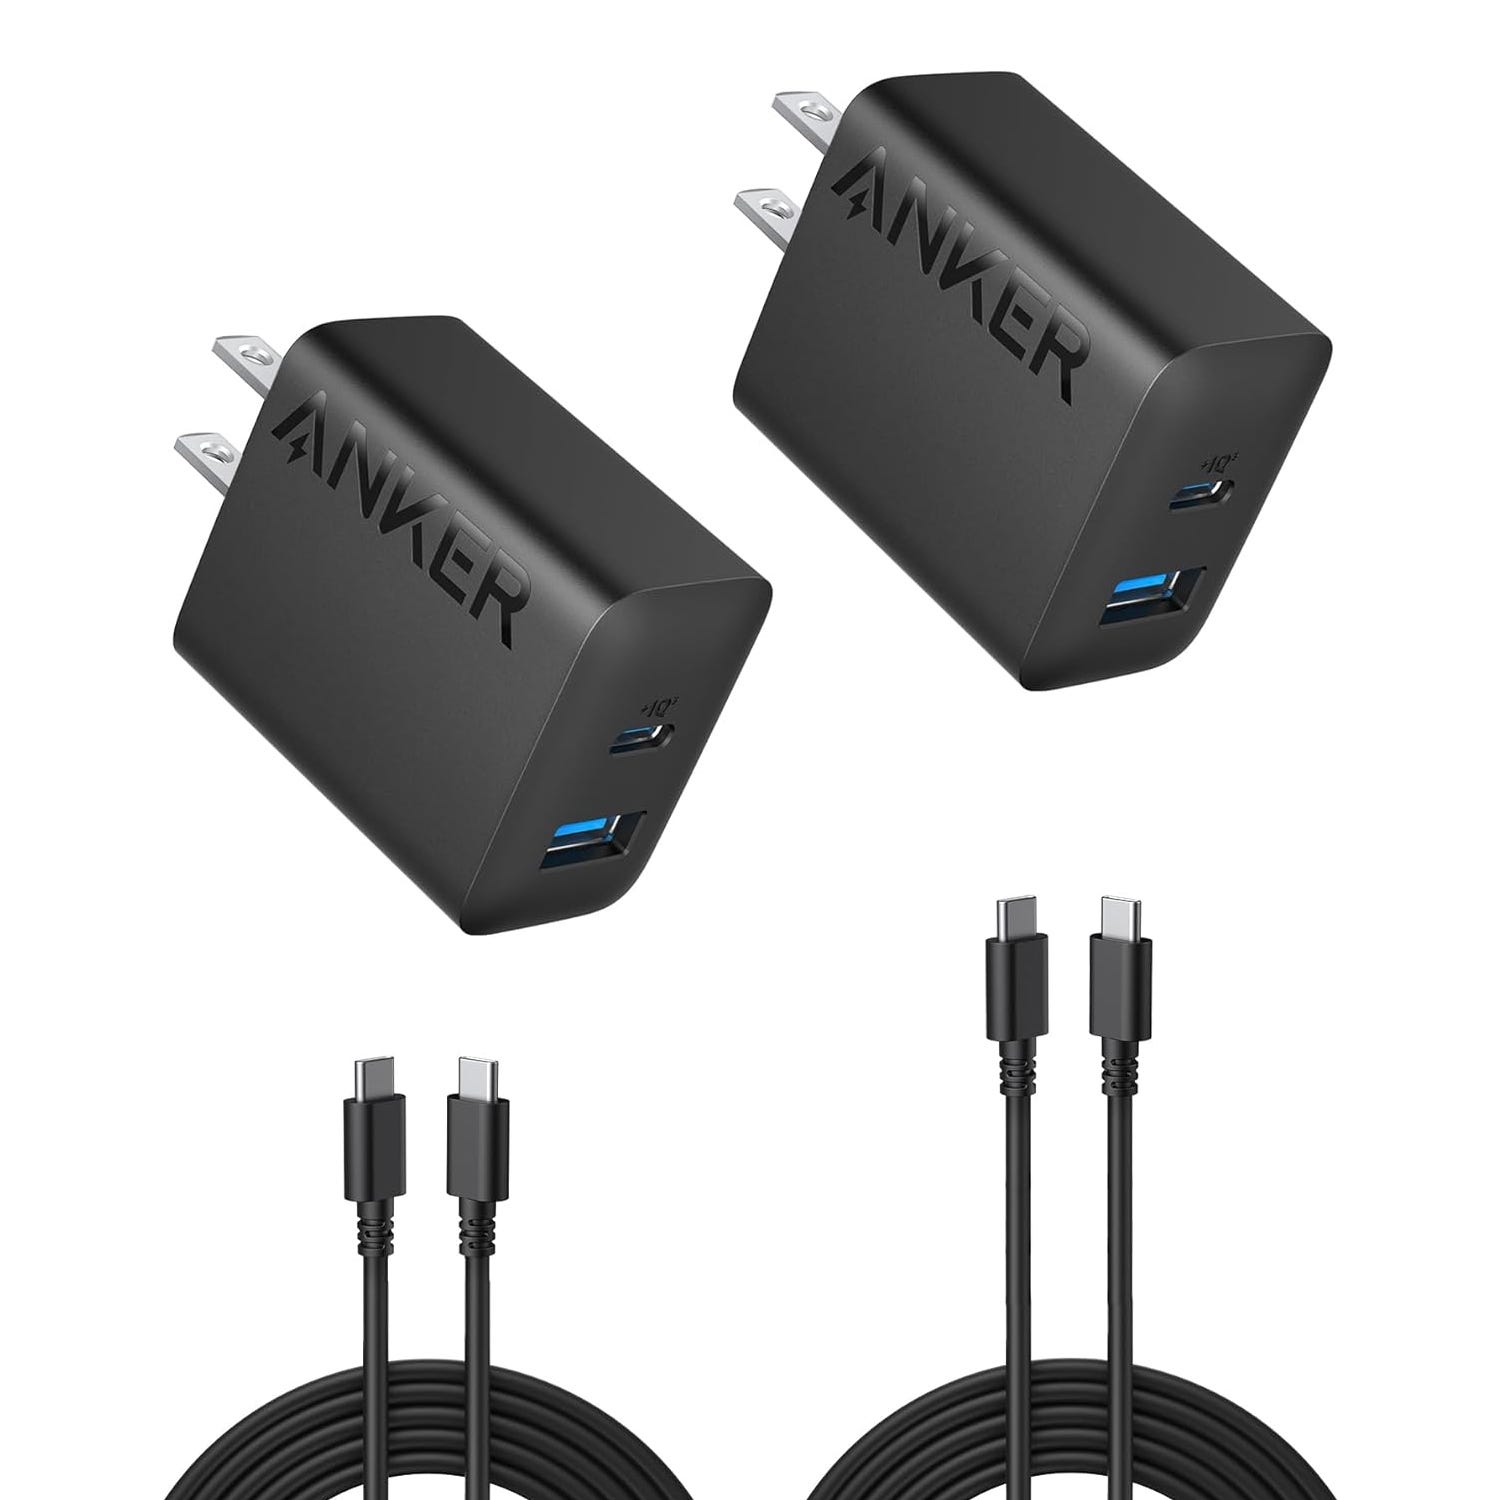 Two black USB wall chargers with dual ports, accompanied by two black USB-C cables.